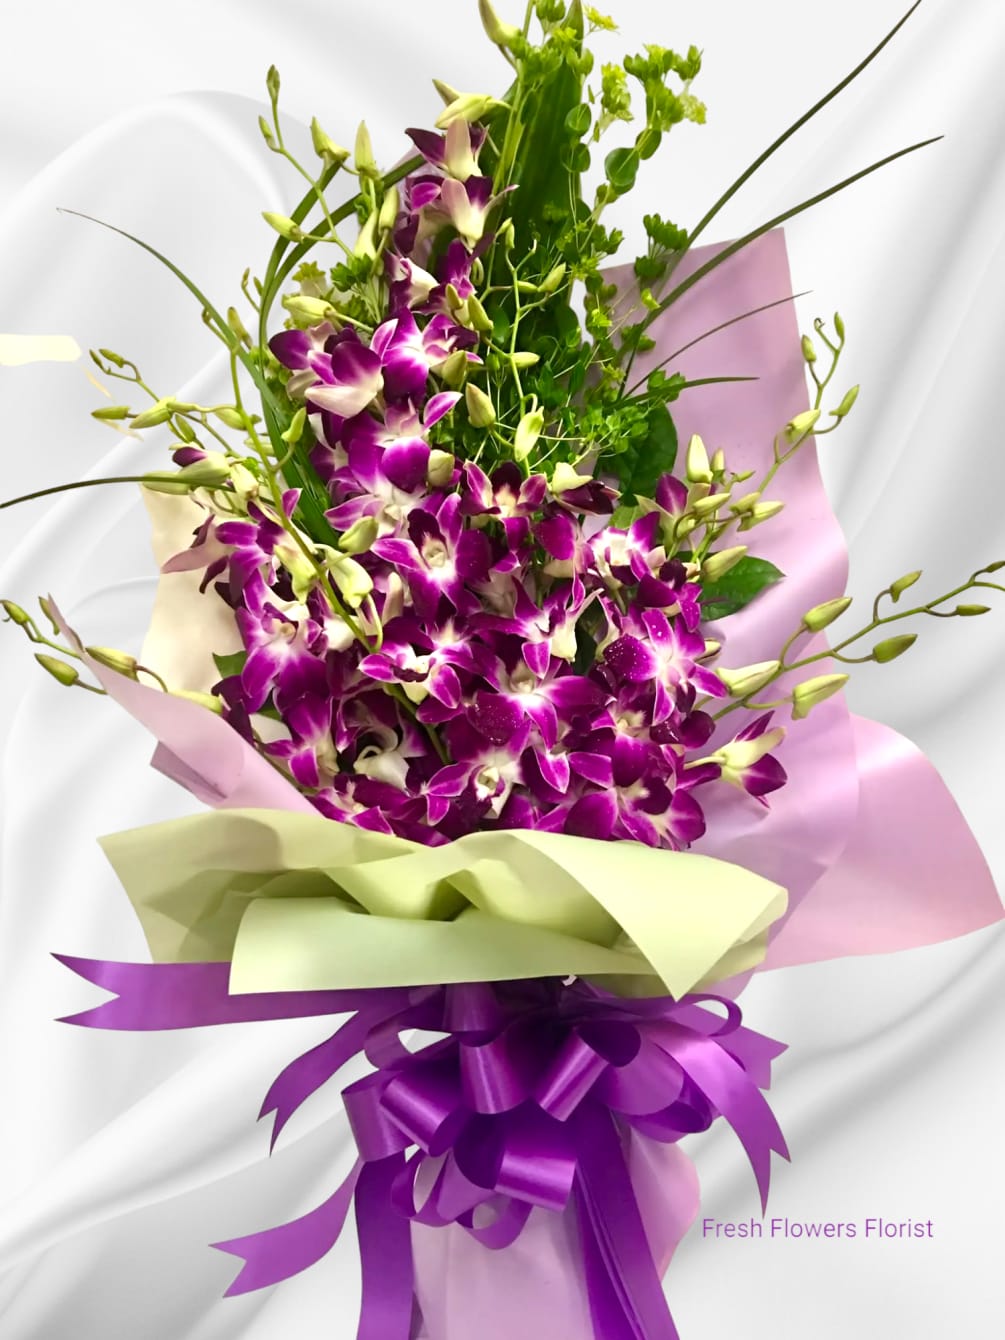 Absolutely Gorgeous Wrap Purple Orchids 
The color of Paper and Ribbon may